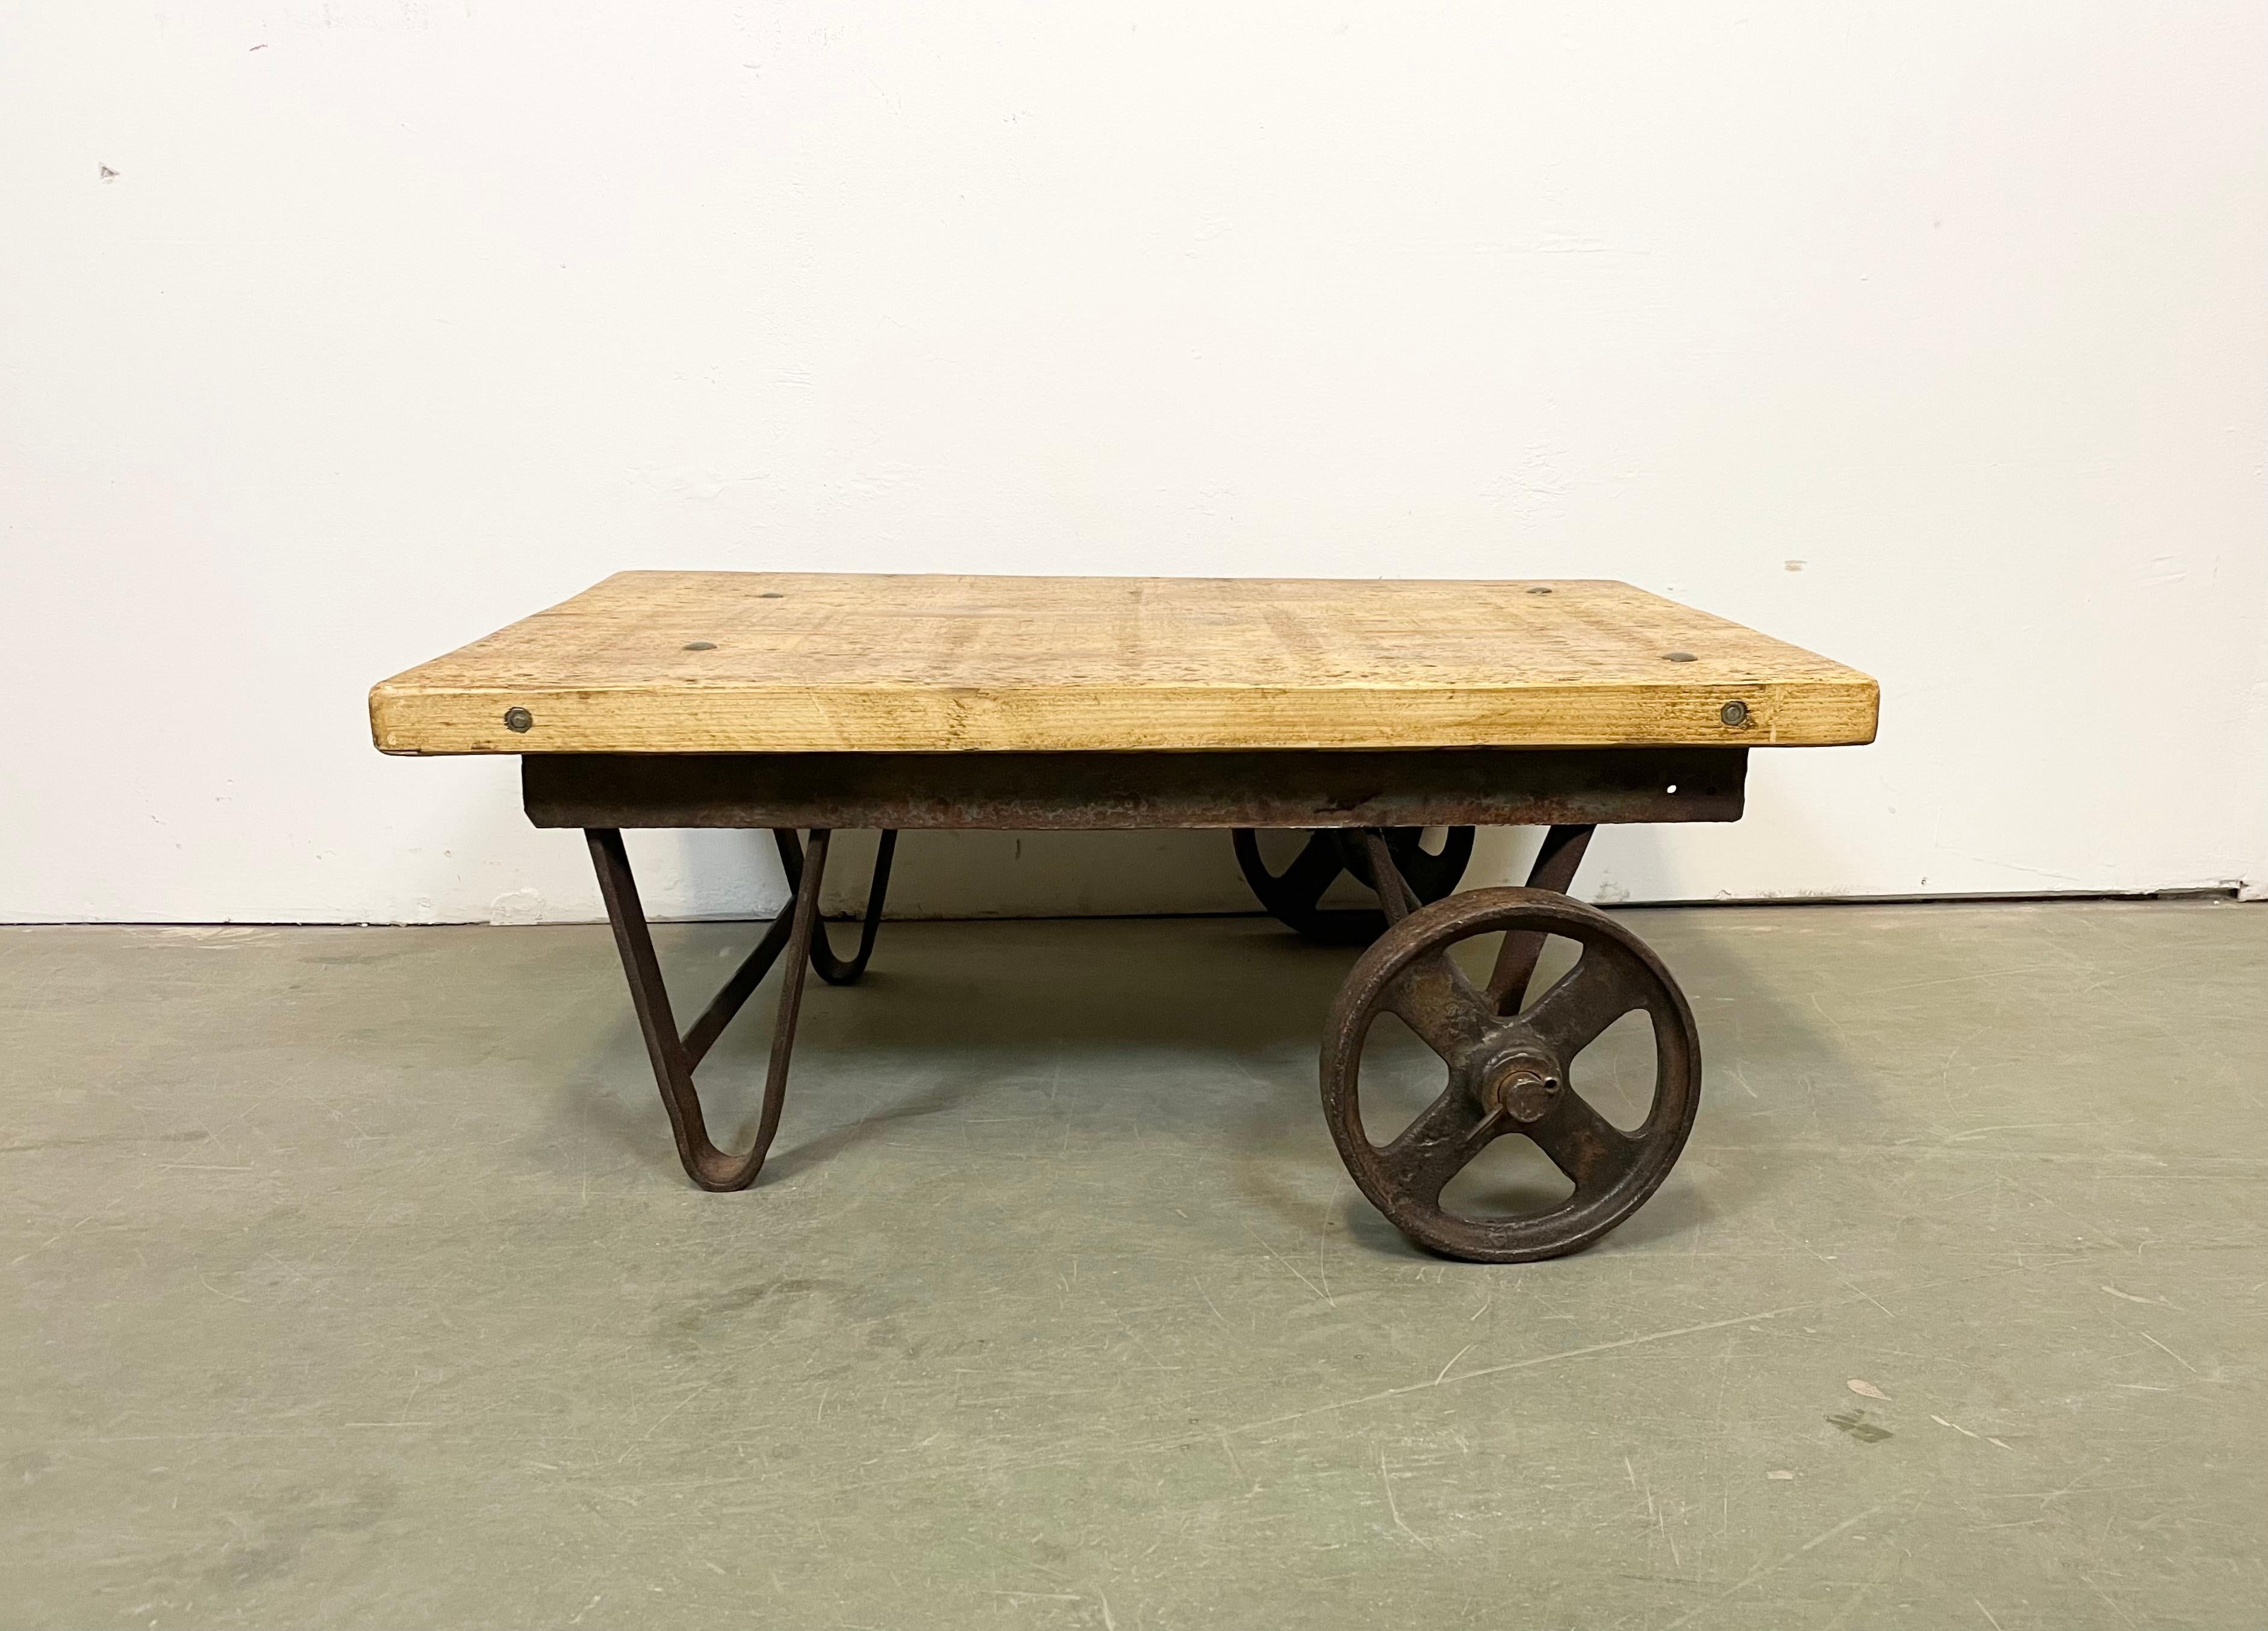 Former pallet truck from a factory now serves as a coffee table. It features a cast iron construction with two original wheels and a solid wooden plate. The weight of the table is 32 kg.